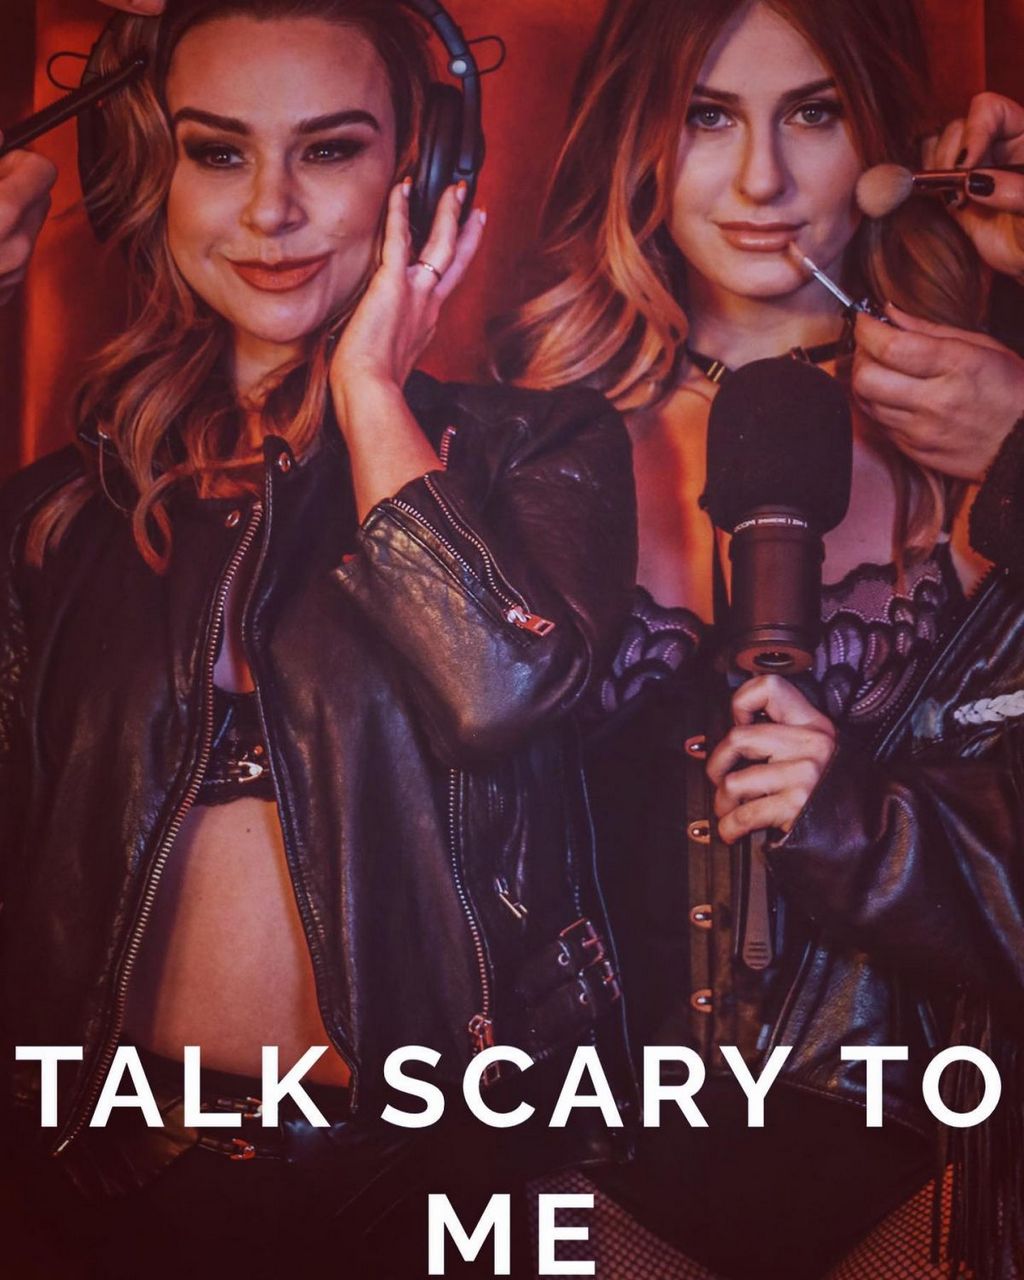 Danielle Harris And Scout Taylor Compton Talk Scary To Me Photoshoot